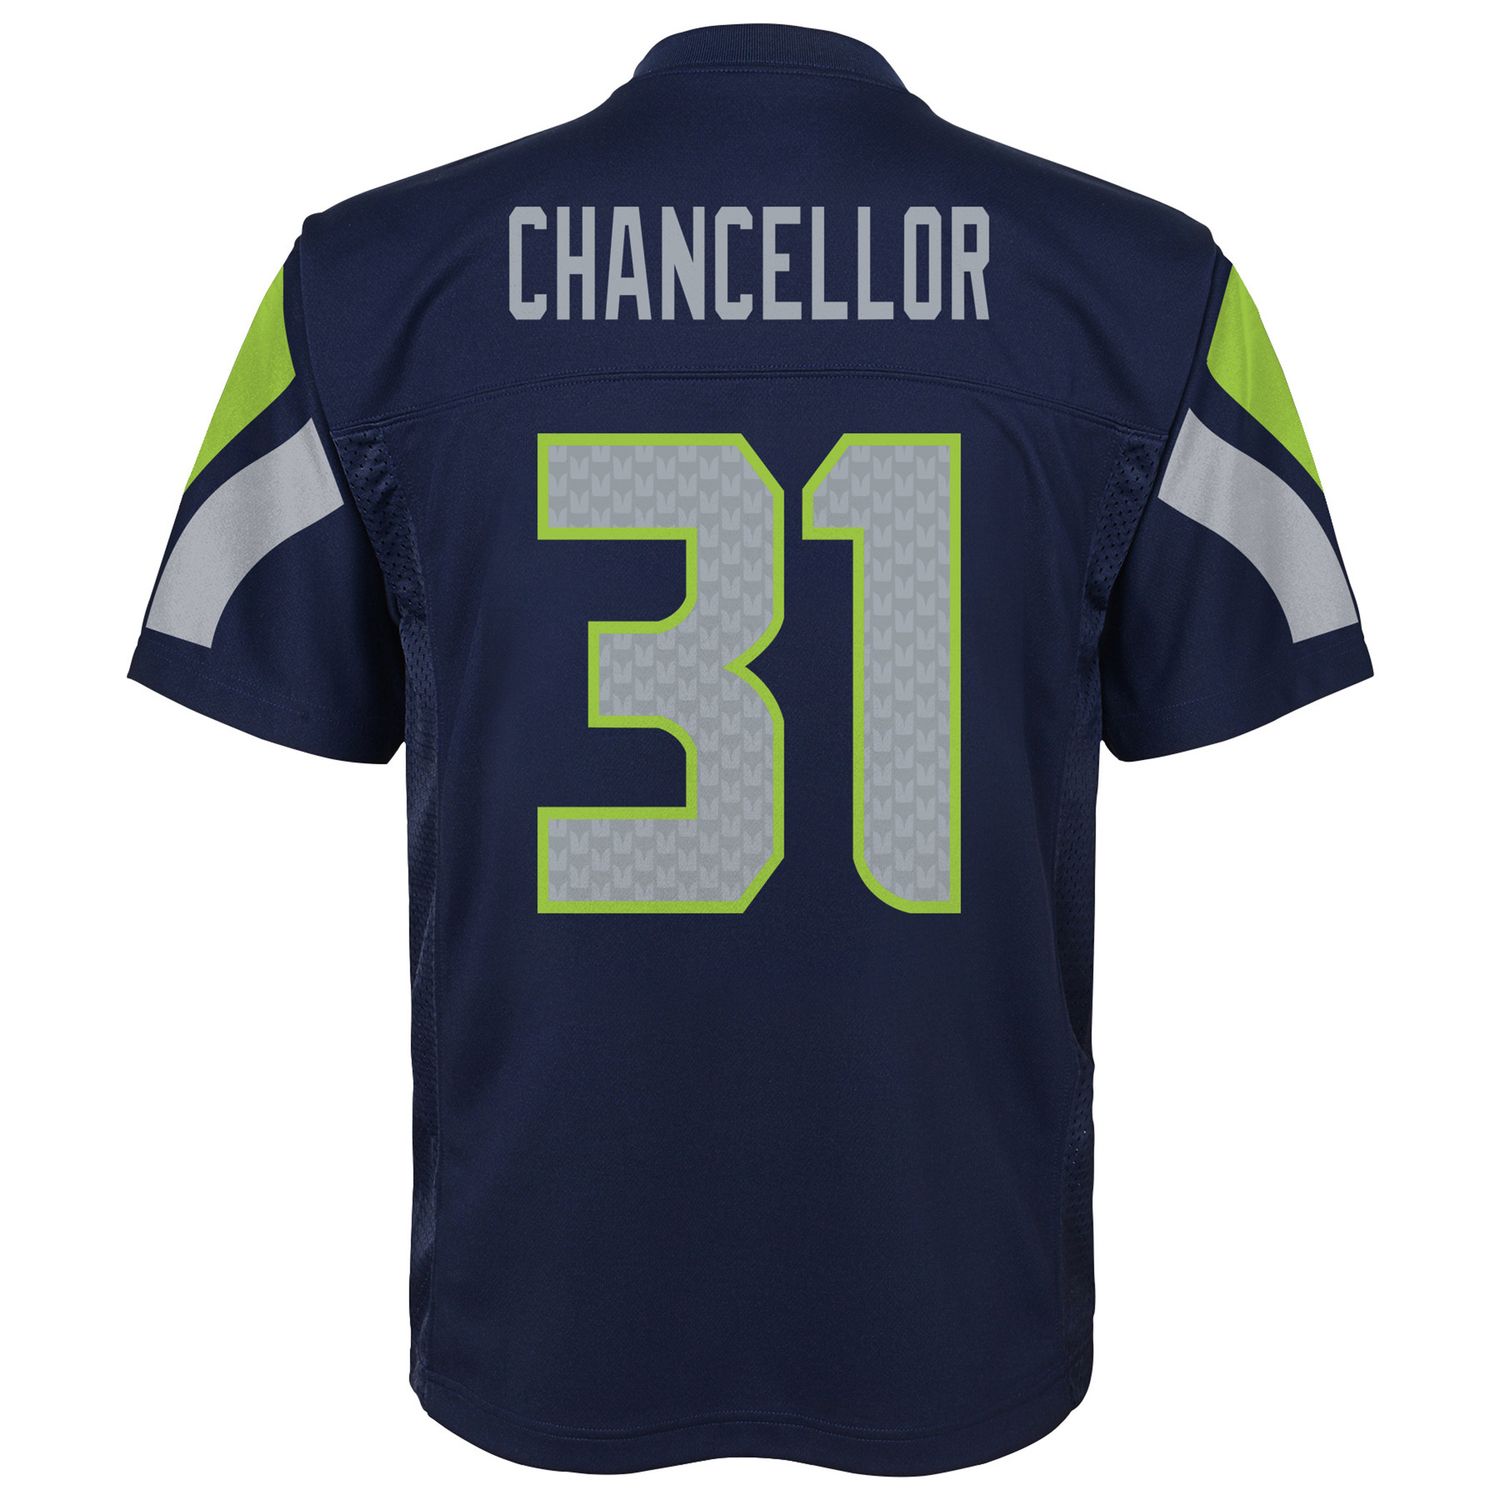 kam chancellor youth jersey